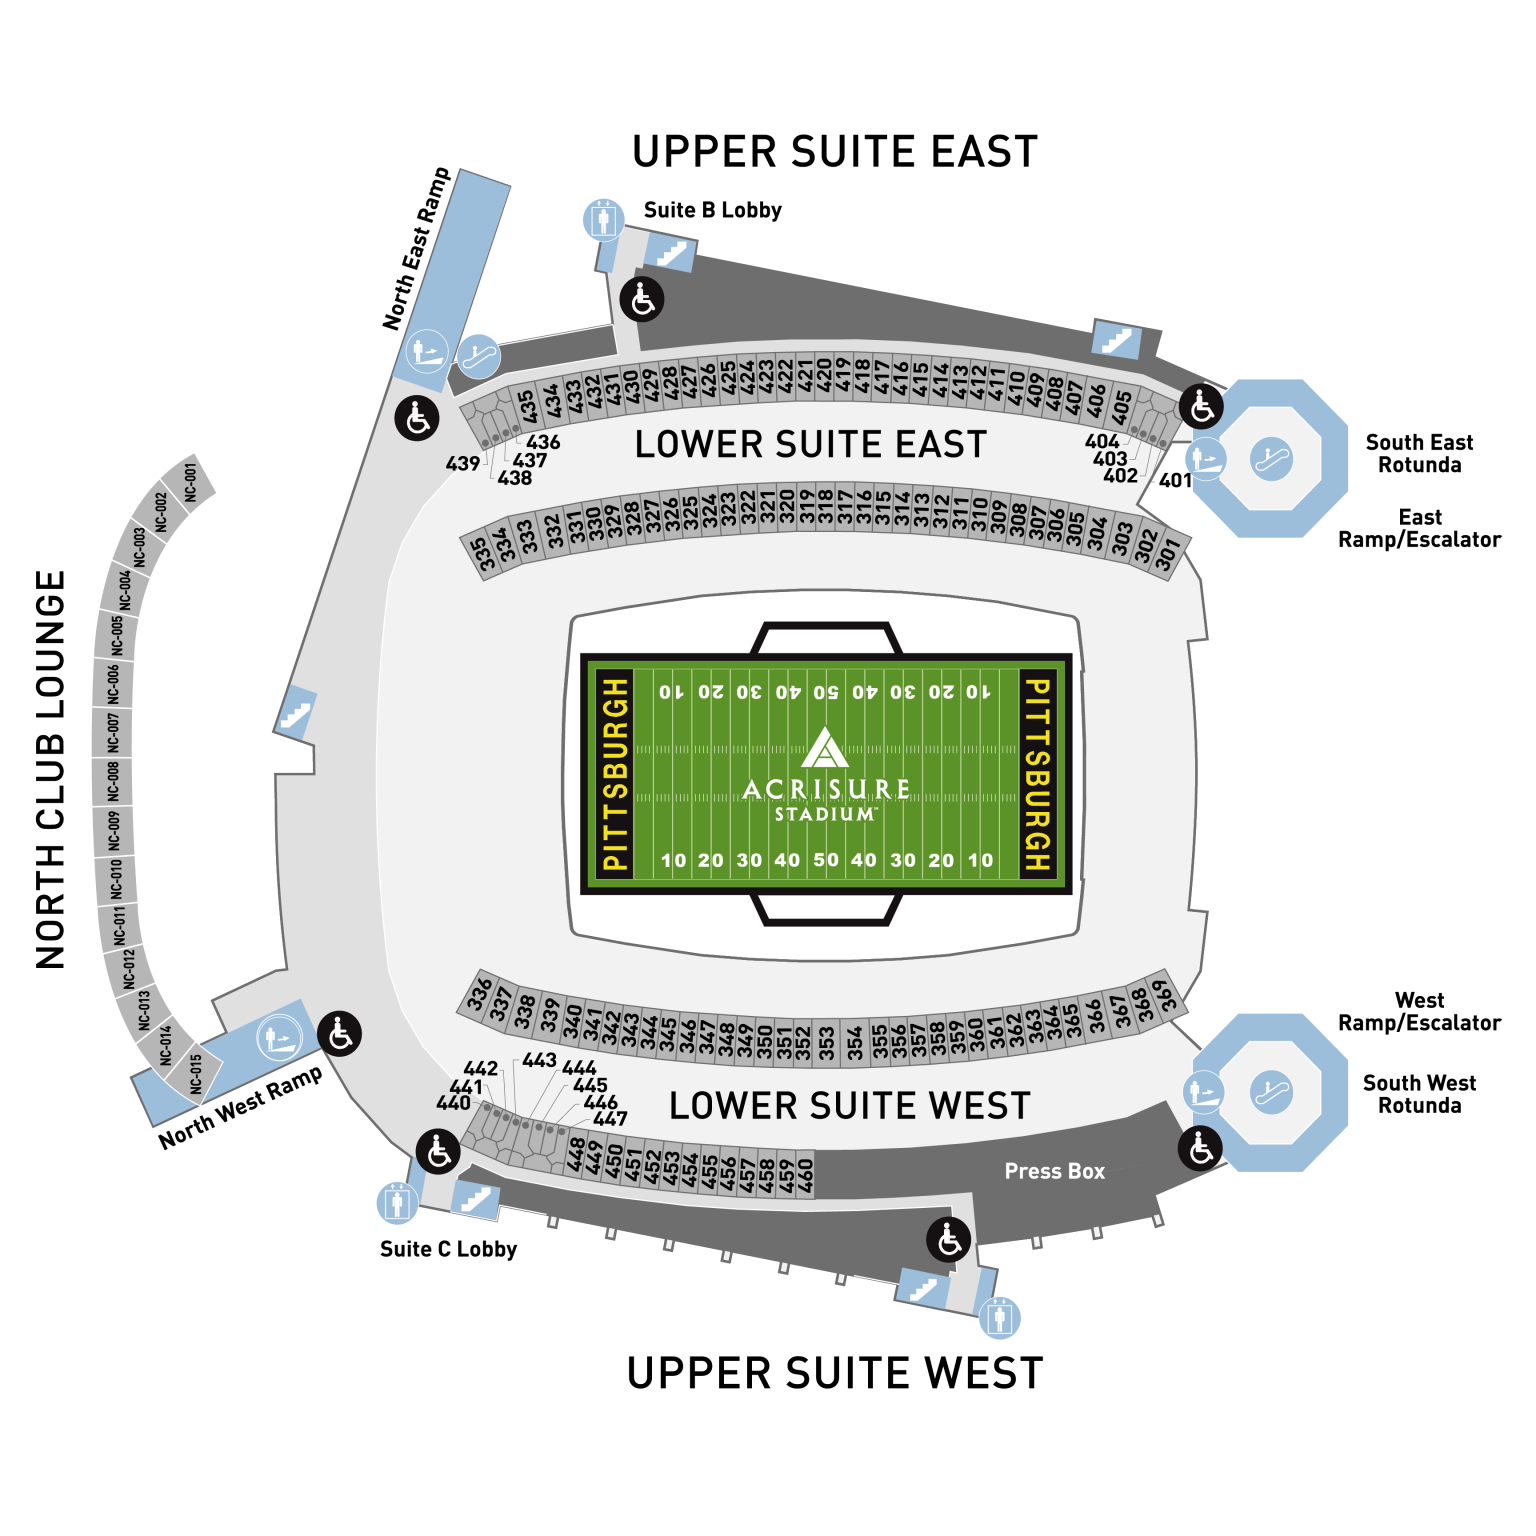 heinz field seating chart- suite level